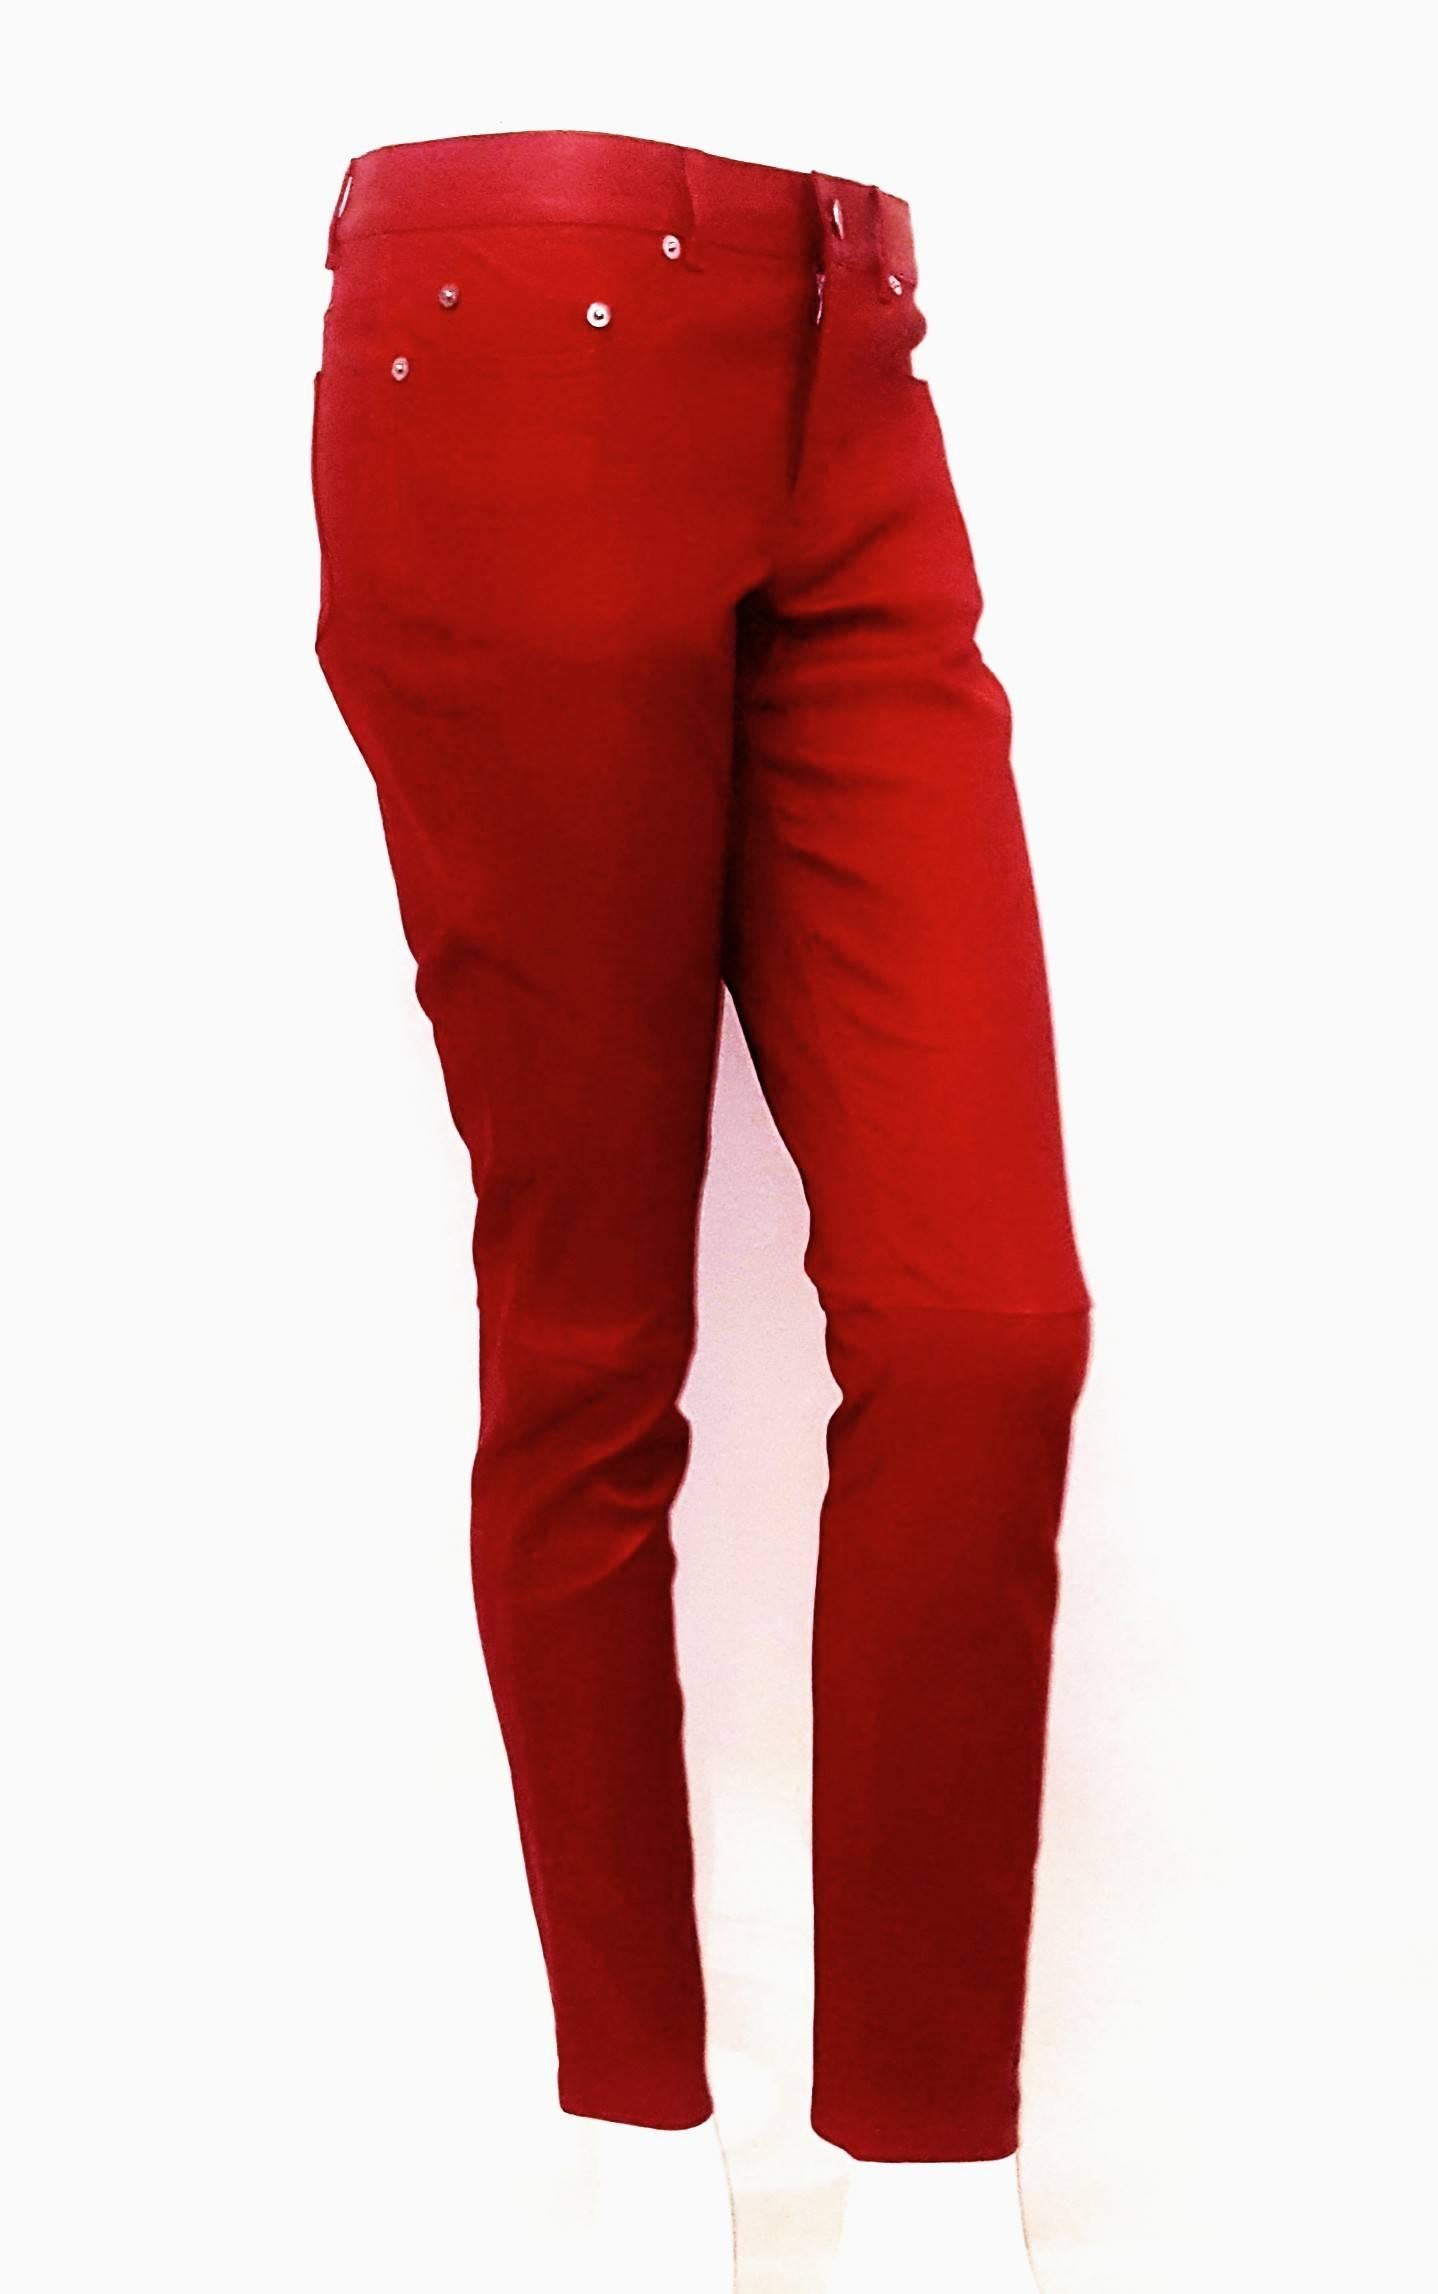 Women's Saint Laurent Red Lambskin Leather Slightly Stretchy Jeans 